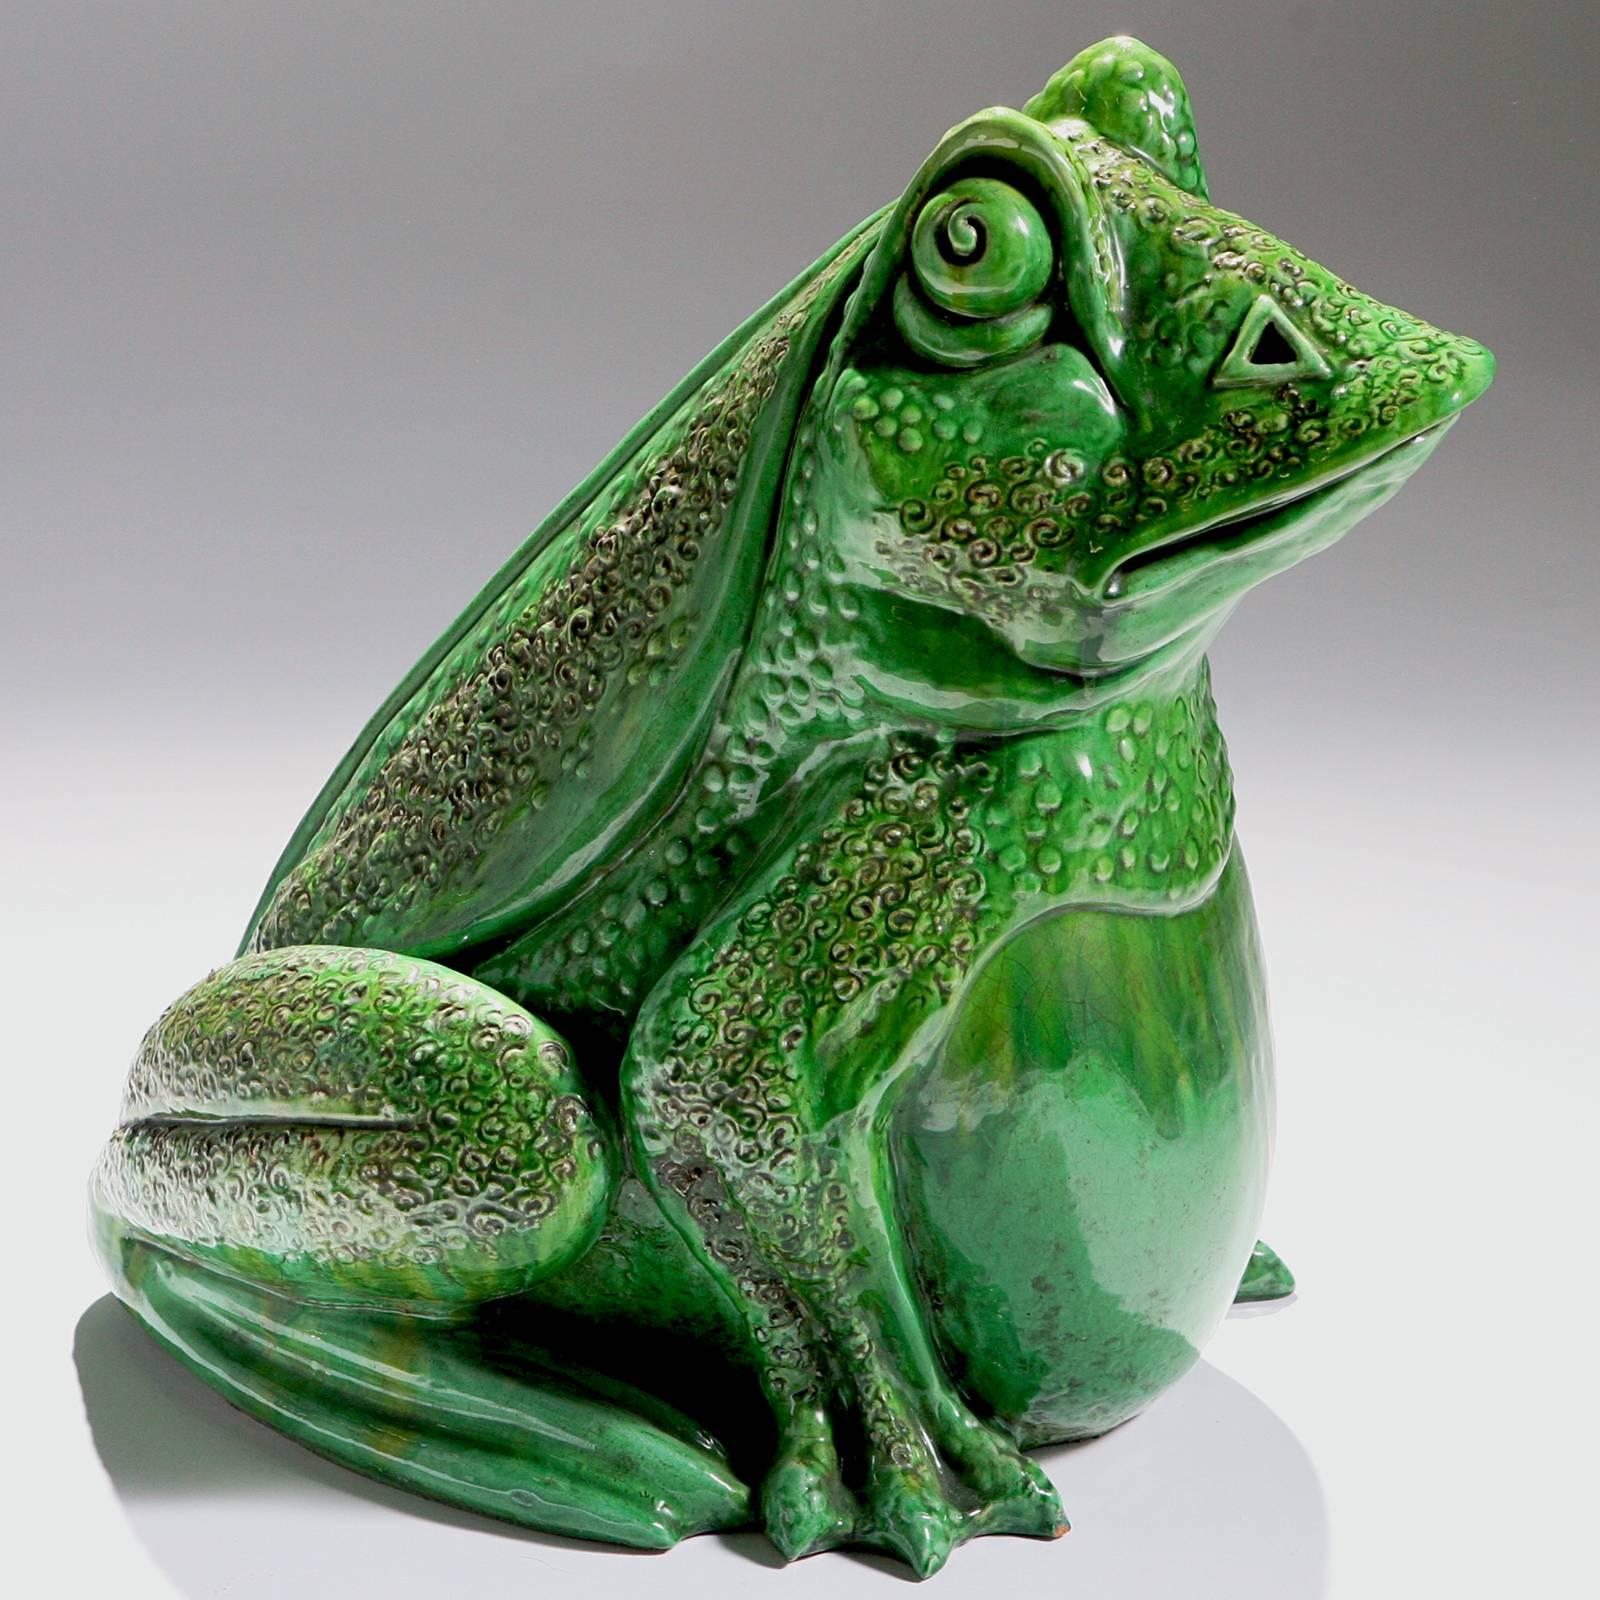 An oversized French garden frog from the early 20th Century.  This two foot high giant has a whimsical expression and a bright green sculpted body.